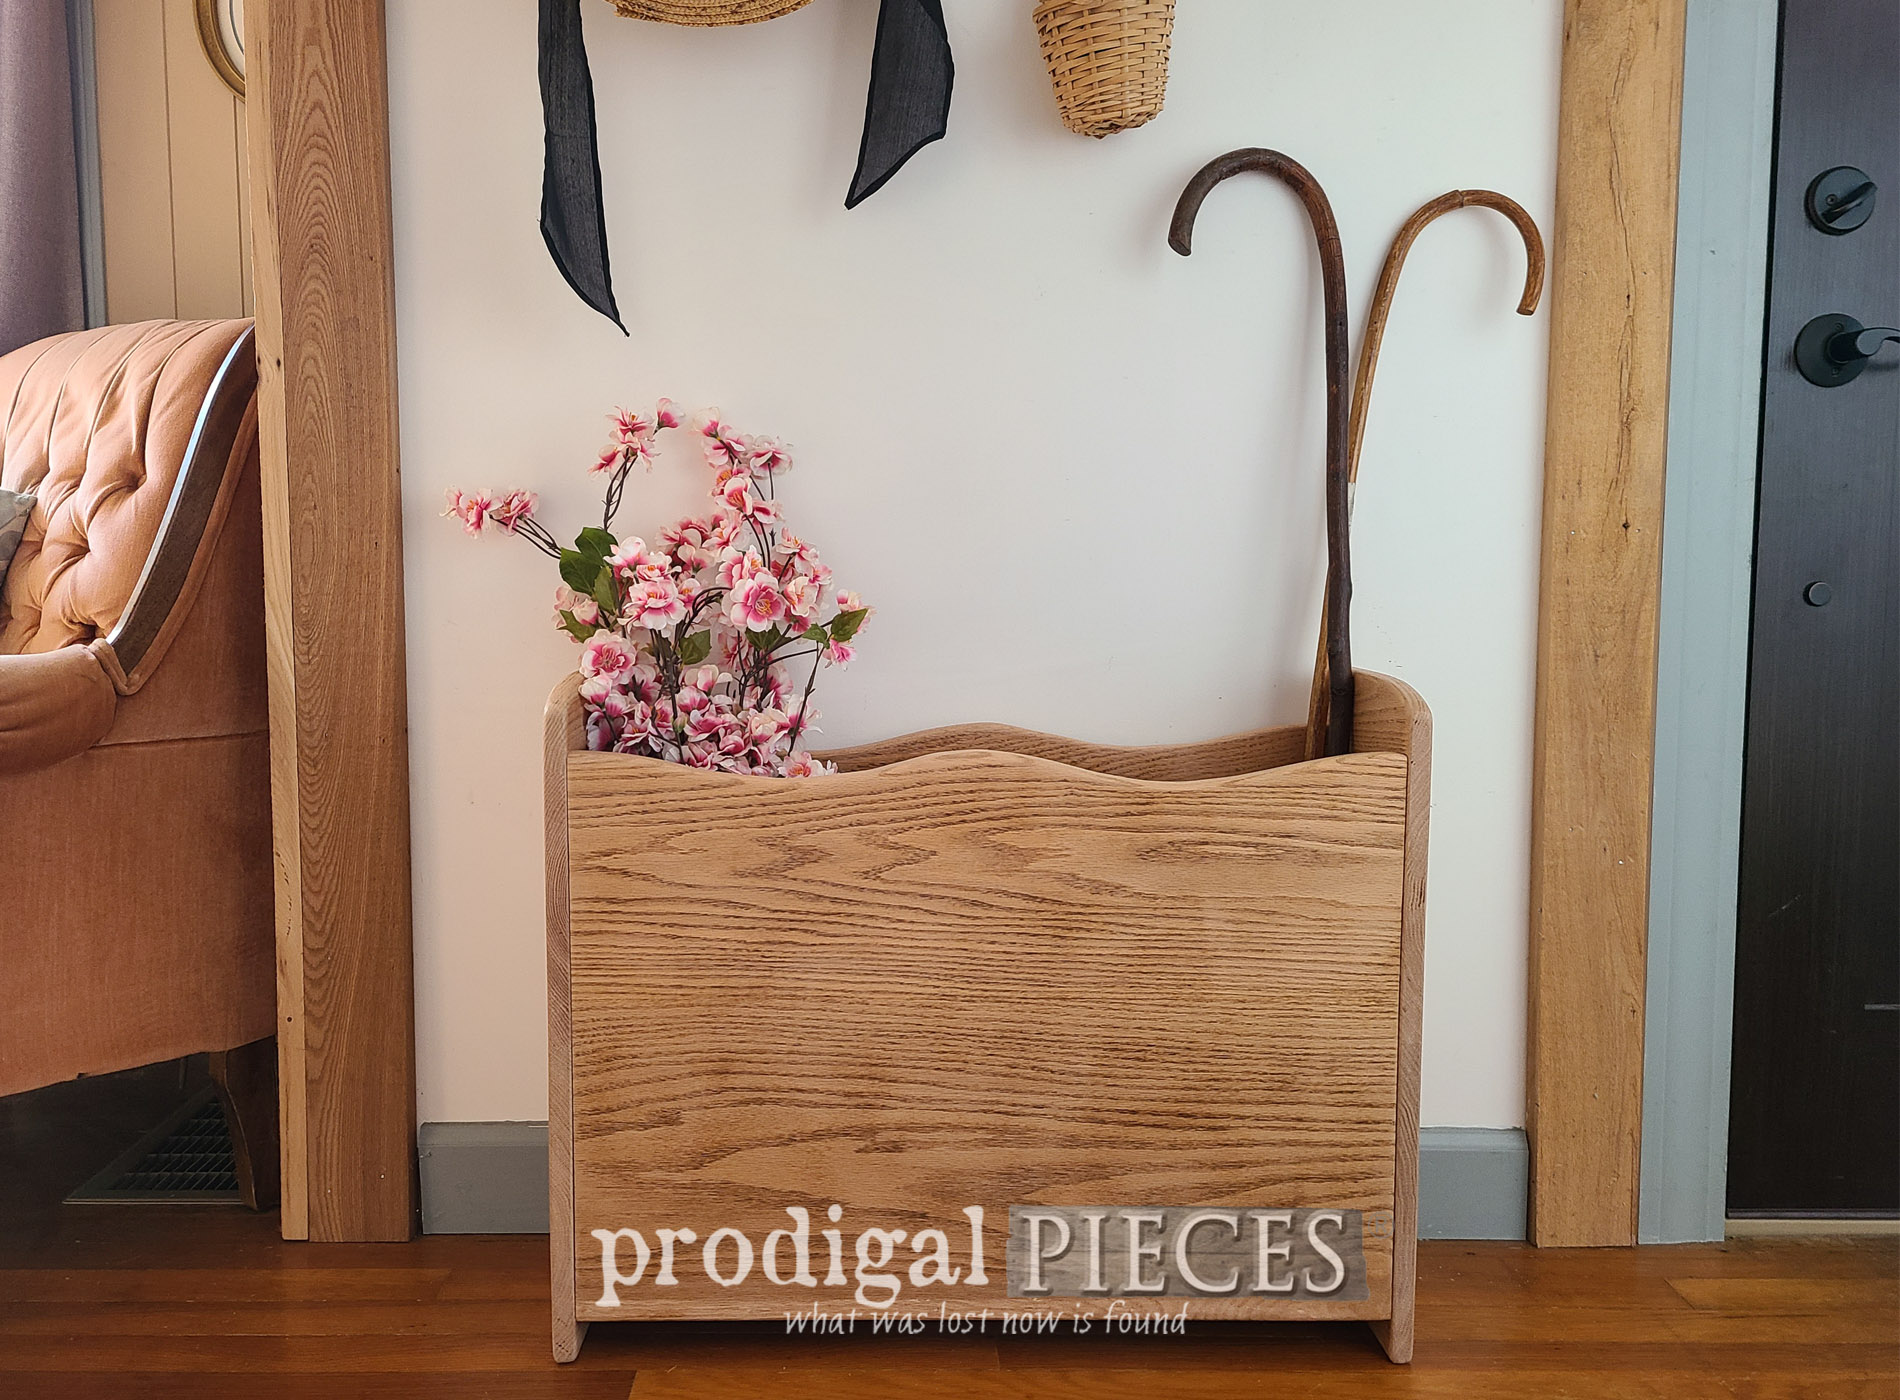 Featured Broken Cradle Upcycled into Storage Bin by Larissa of Prodigal Pieces | prodigalpieces.com #prodigalpieces